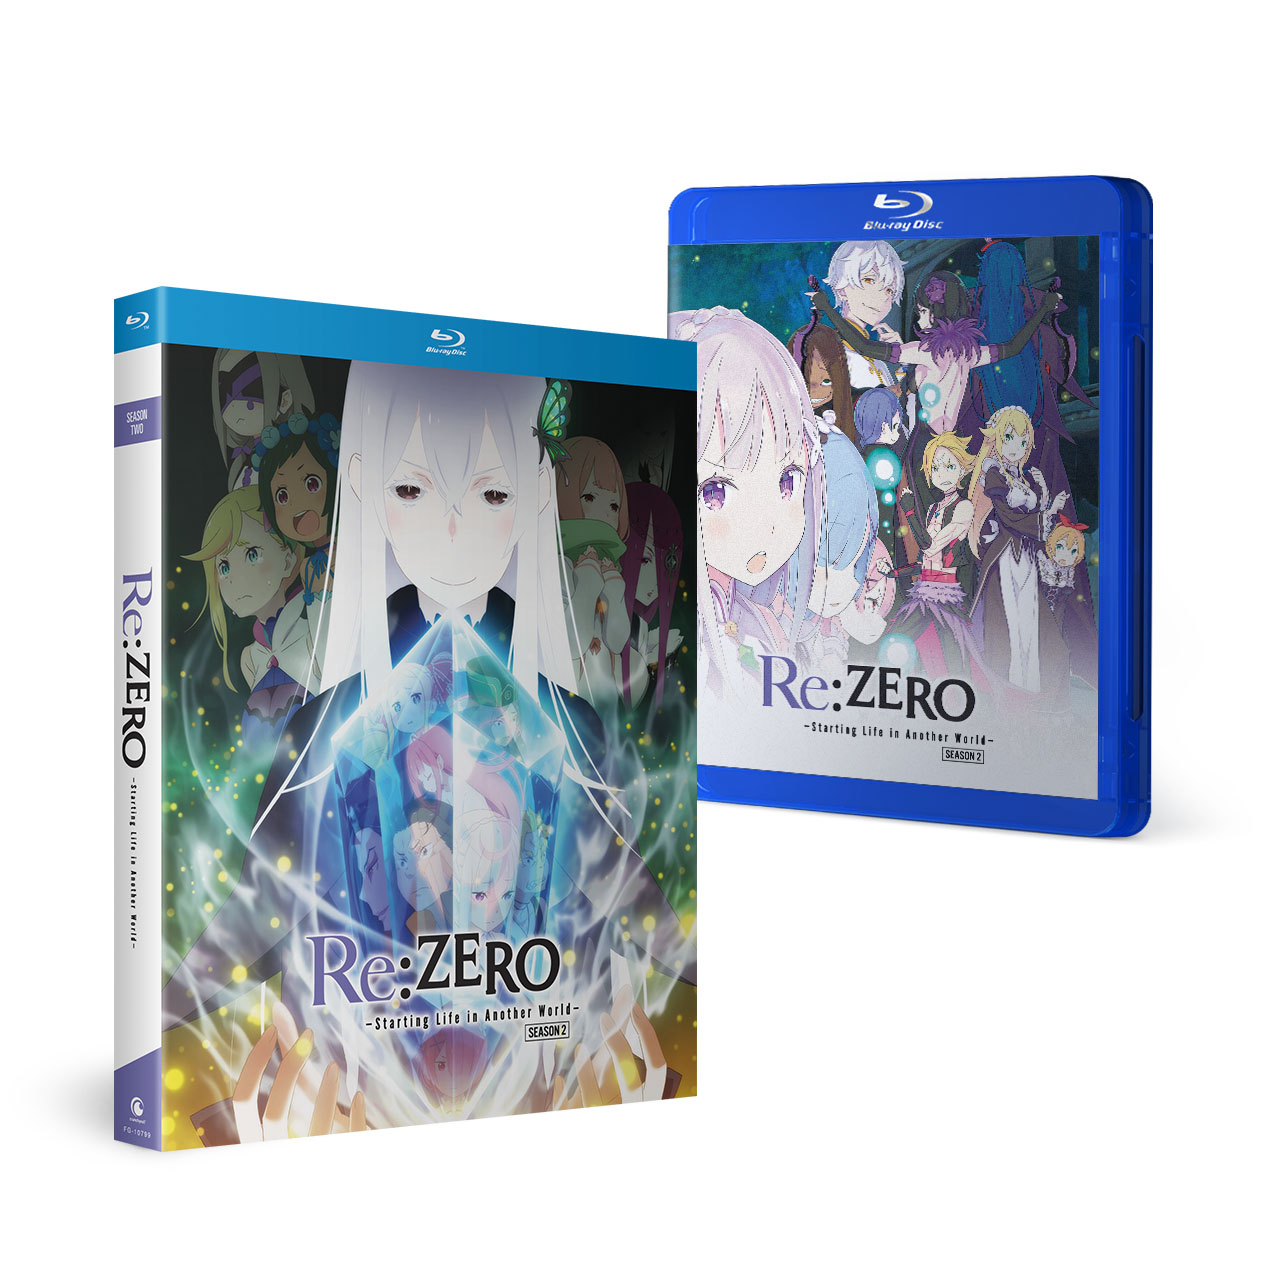 Re:ZERO -Starting Life in Another World- Season 2 - Blu-ray image count 0